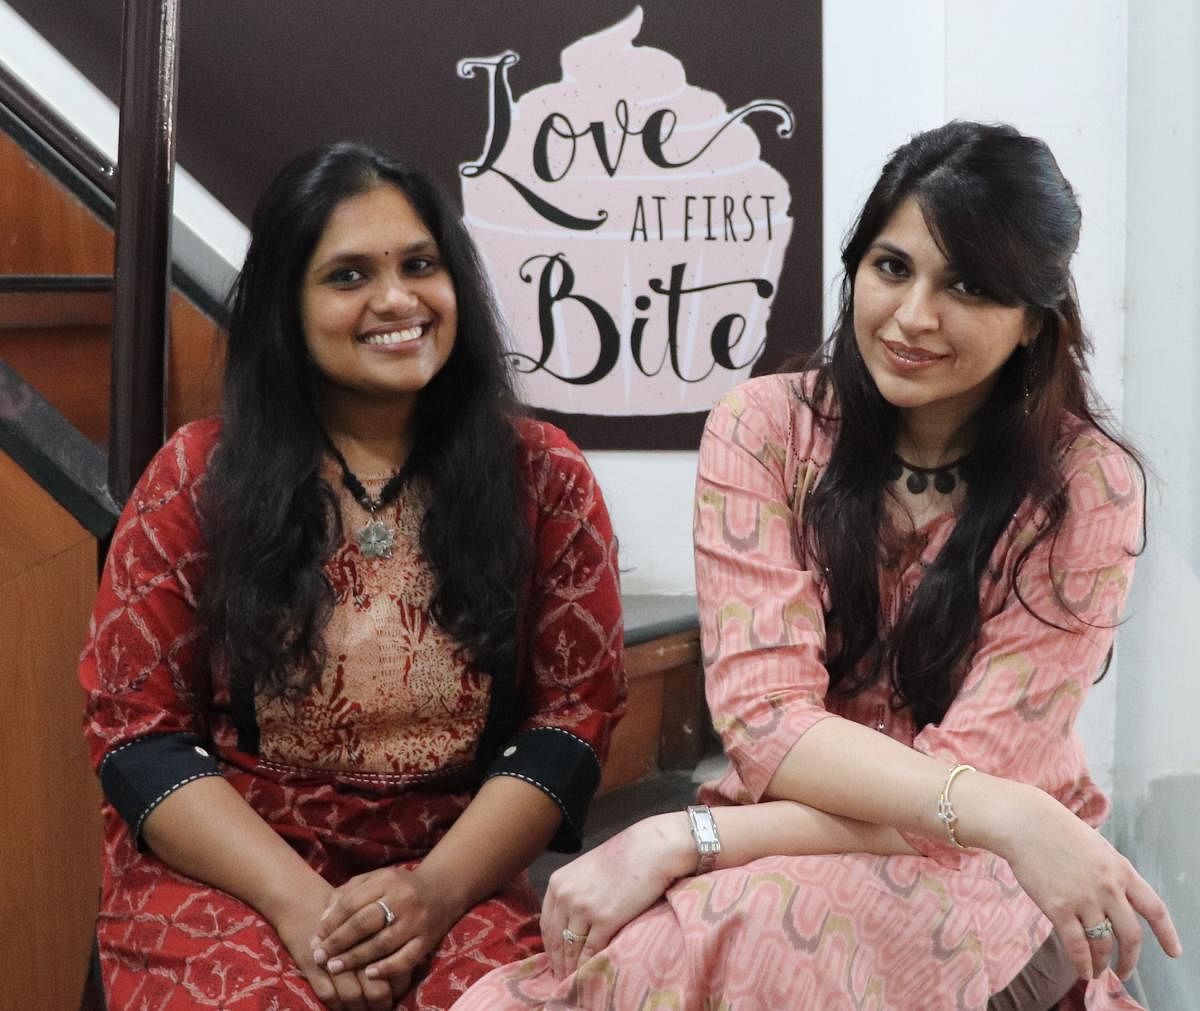 Rukmini and Jhanvi of Mistletoe Asia, a specialist bakery in Koramangala. They had to suspend operations soon after launch, but are now back.